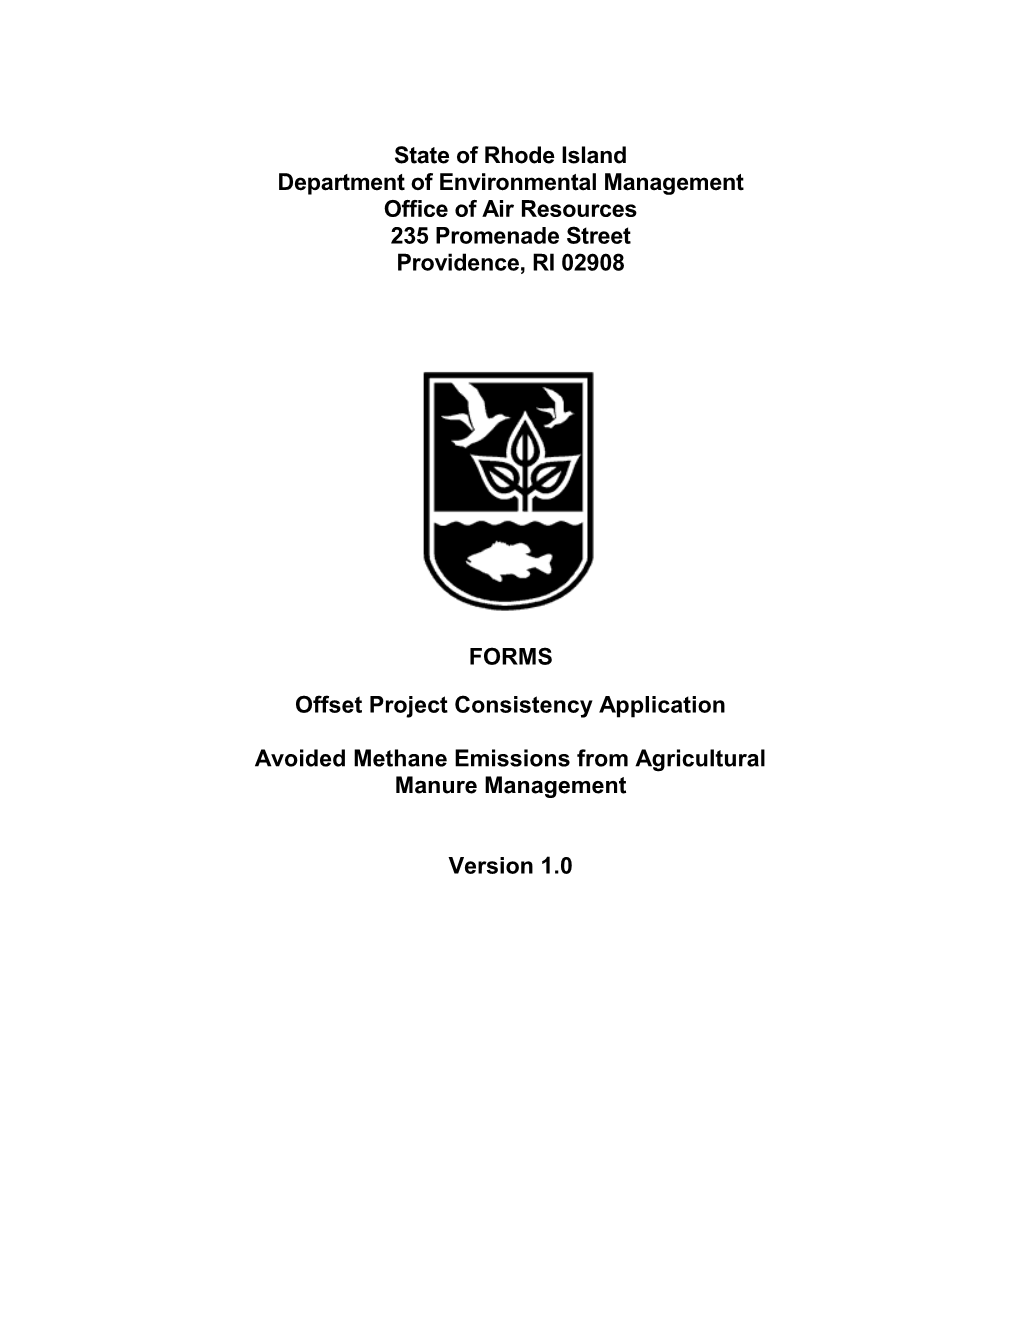 Avoided Methane Emissions from Agricultural Manure Management - CA Forms